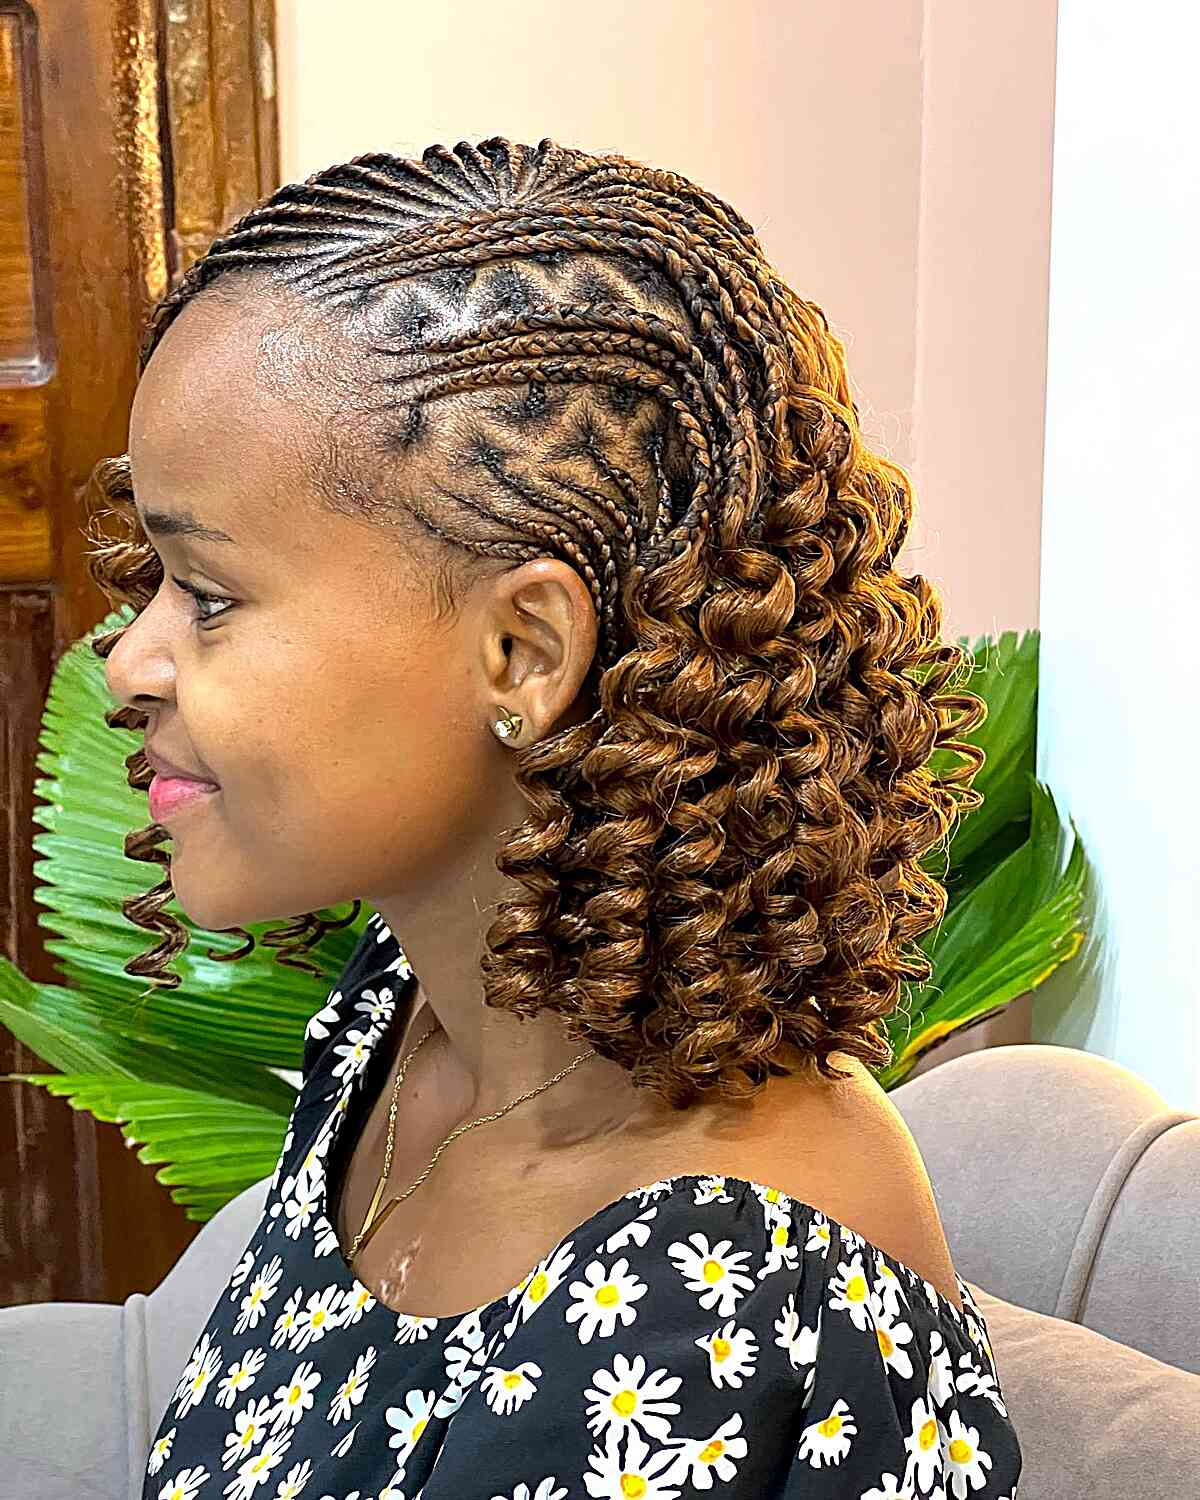 Shoulder-Length Micro Braided Bob with Curls and Zig-Zag Pattern